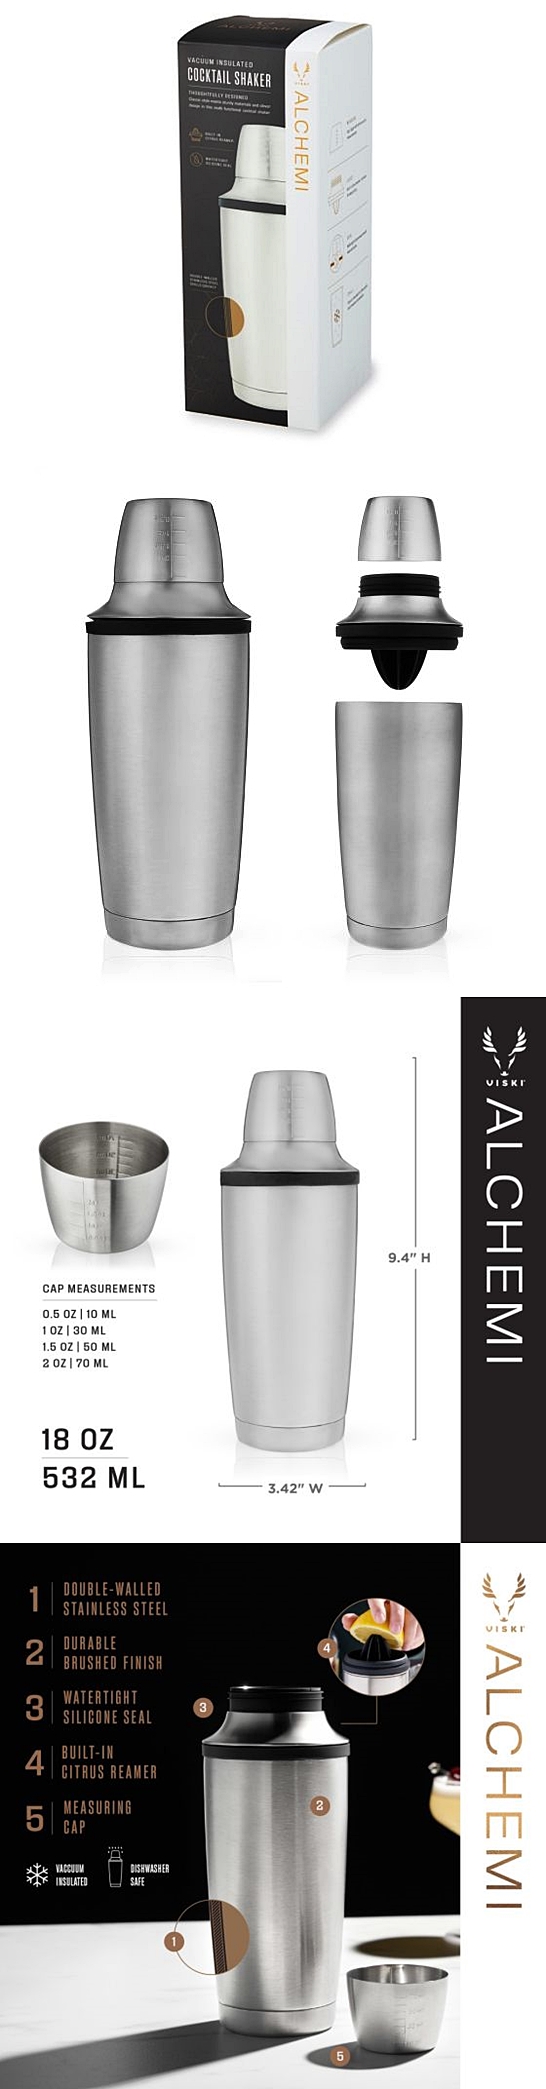 Viski Alchemi Vacuum Insulated Cocktail Shaker - Stainless Steel Double  Walled Shaker with Citrus Reamer, Cap, Strainer - 18 Oz 3-Piece Bar Set